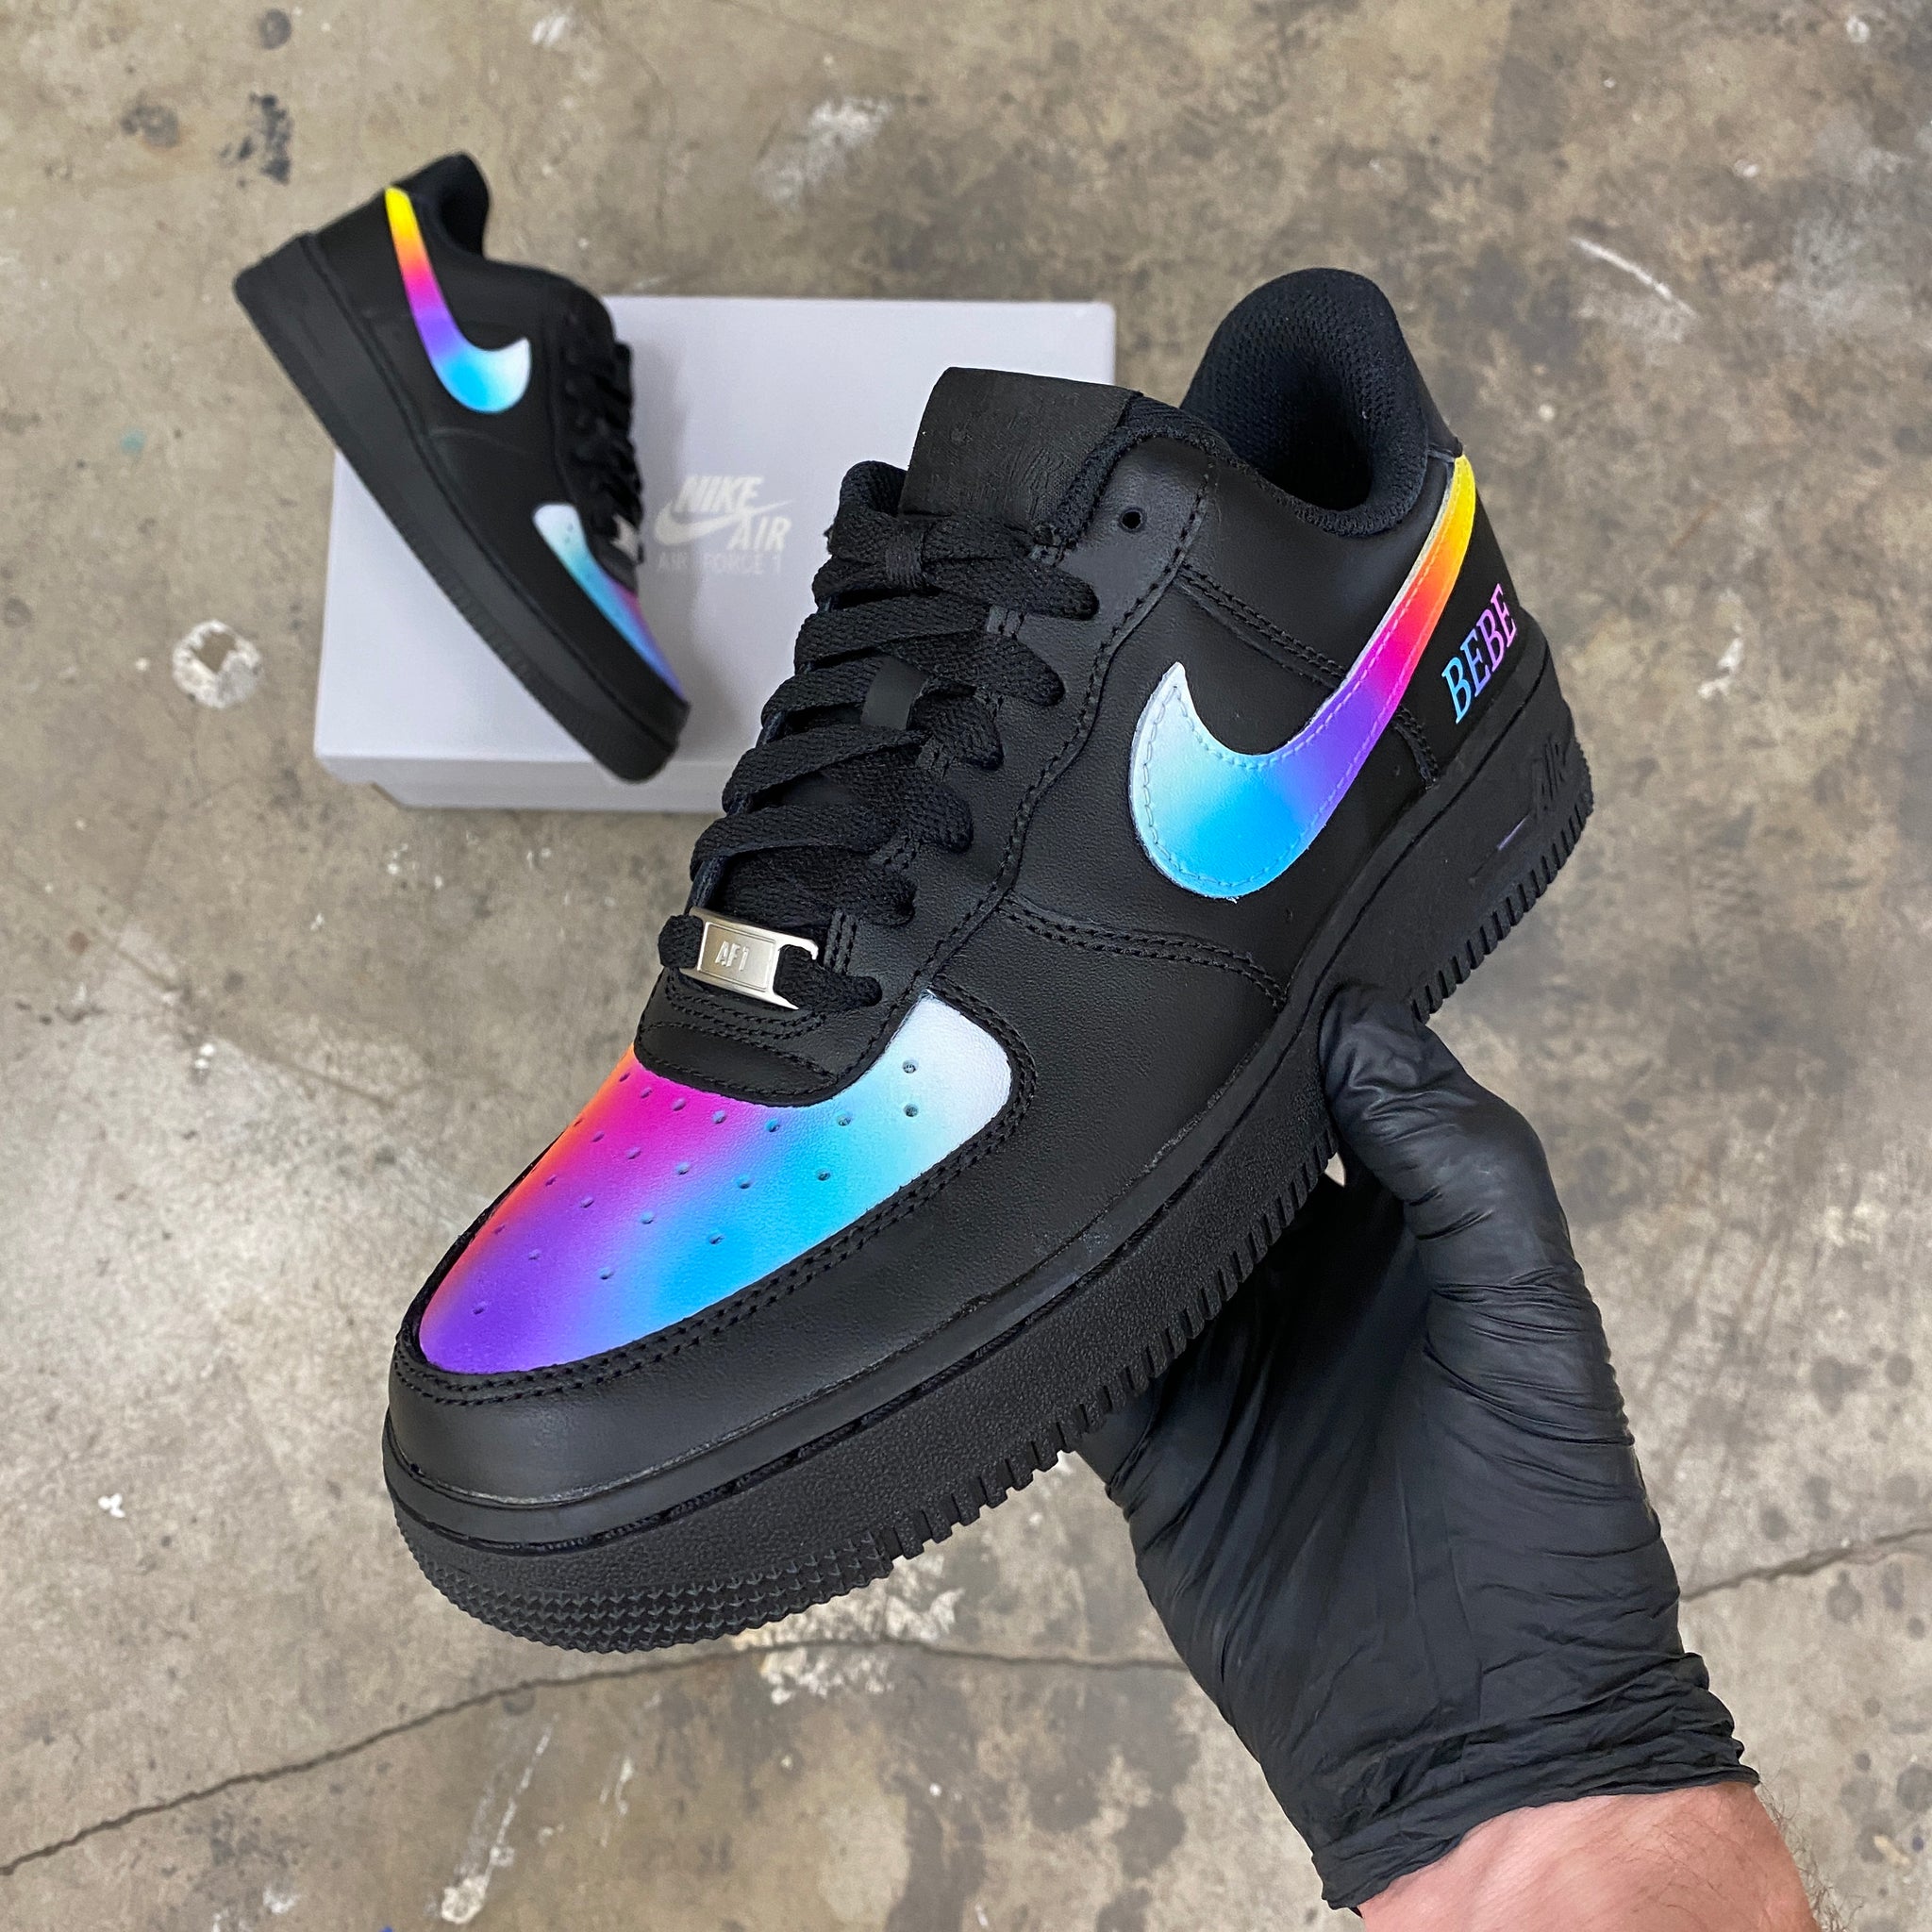 Custom Painted Nike Air Force 1 Sinful Colors - Available to